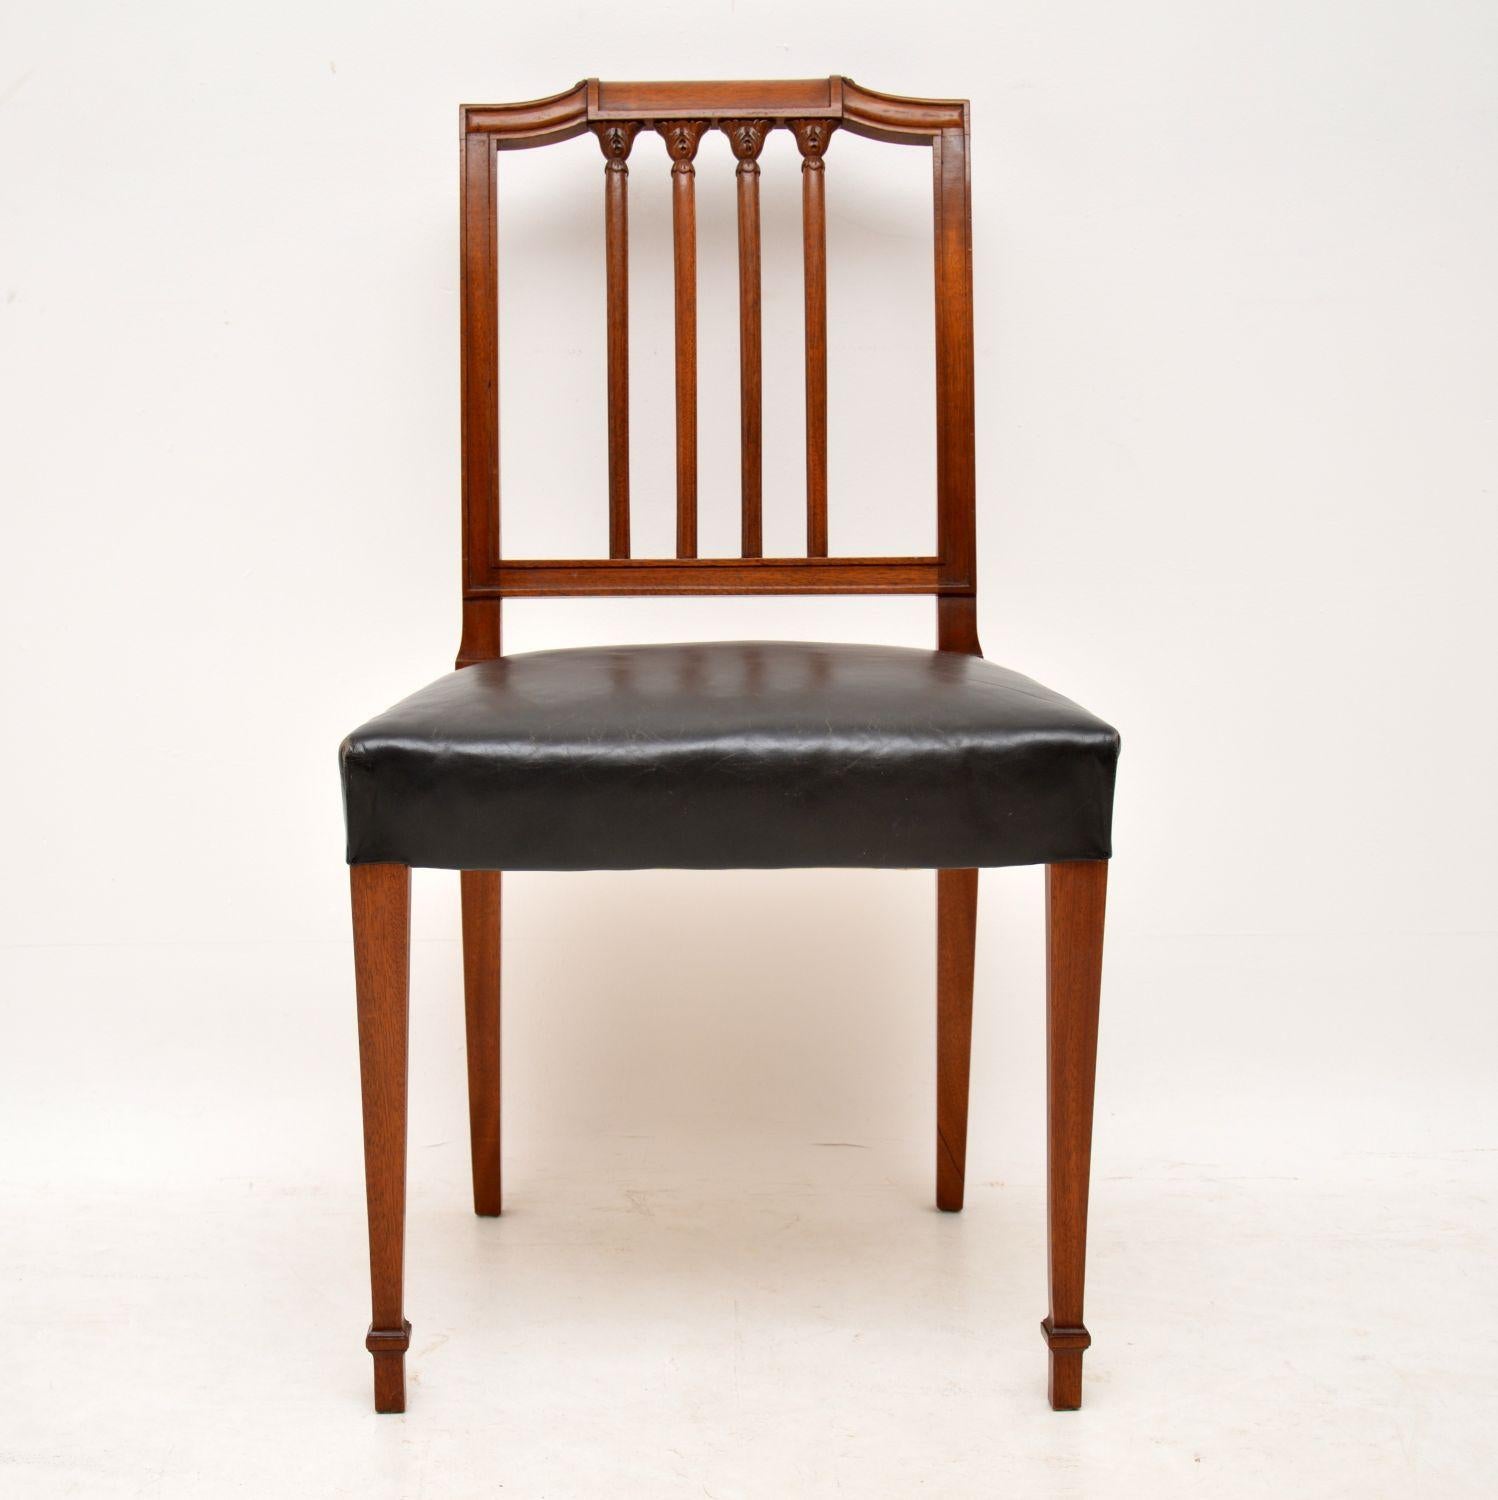 Nice quality set of four antique Georgian style mahogany dining chairs dating from circa 1910 period. They are in good condition and have sprung leather seats which may be original. The leather is still in good condition and I think the black